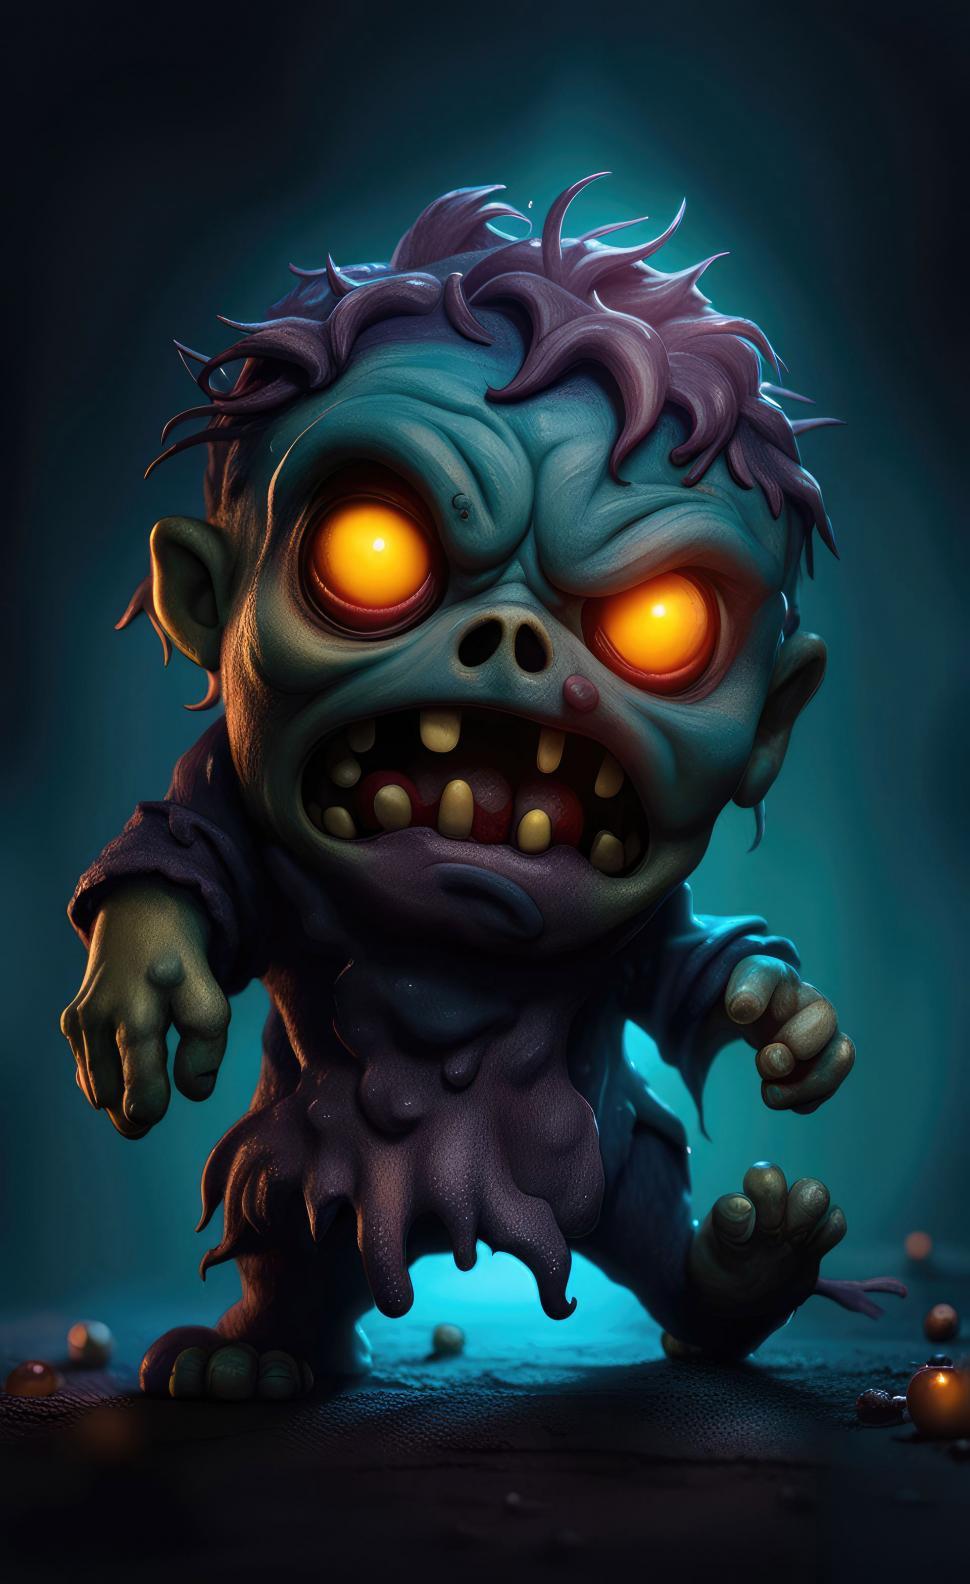 Free Image of Spooky scary halloween zombie monster  